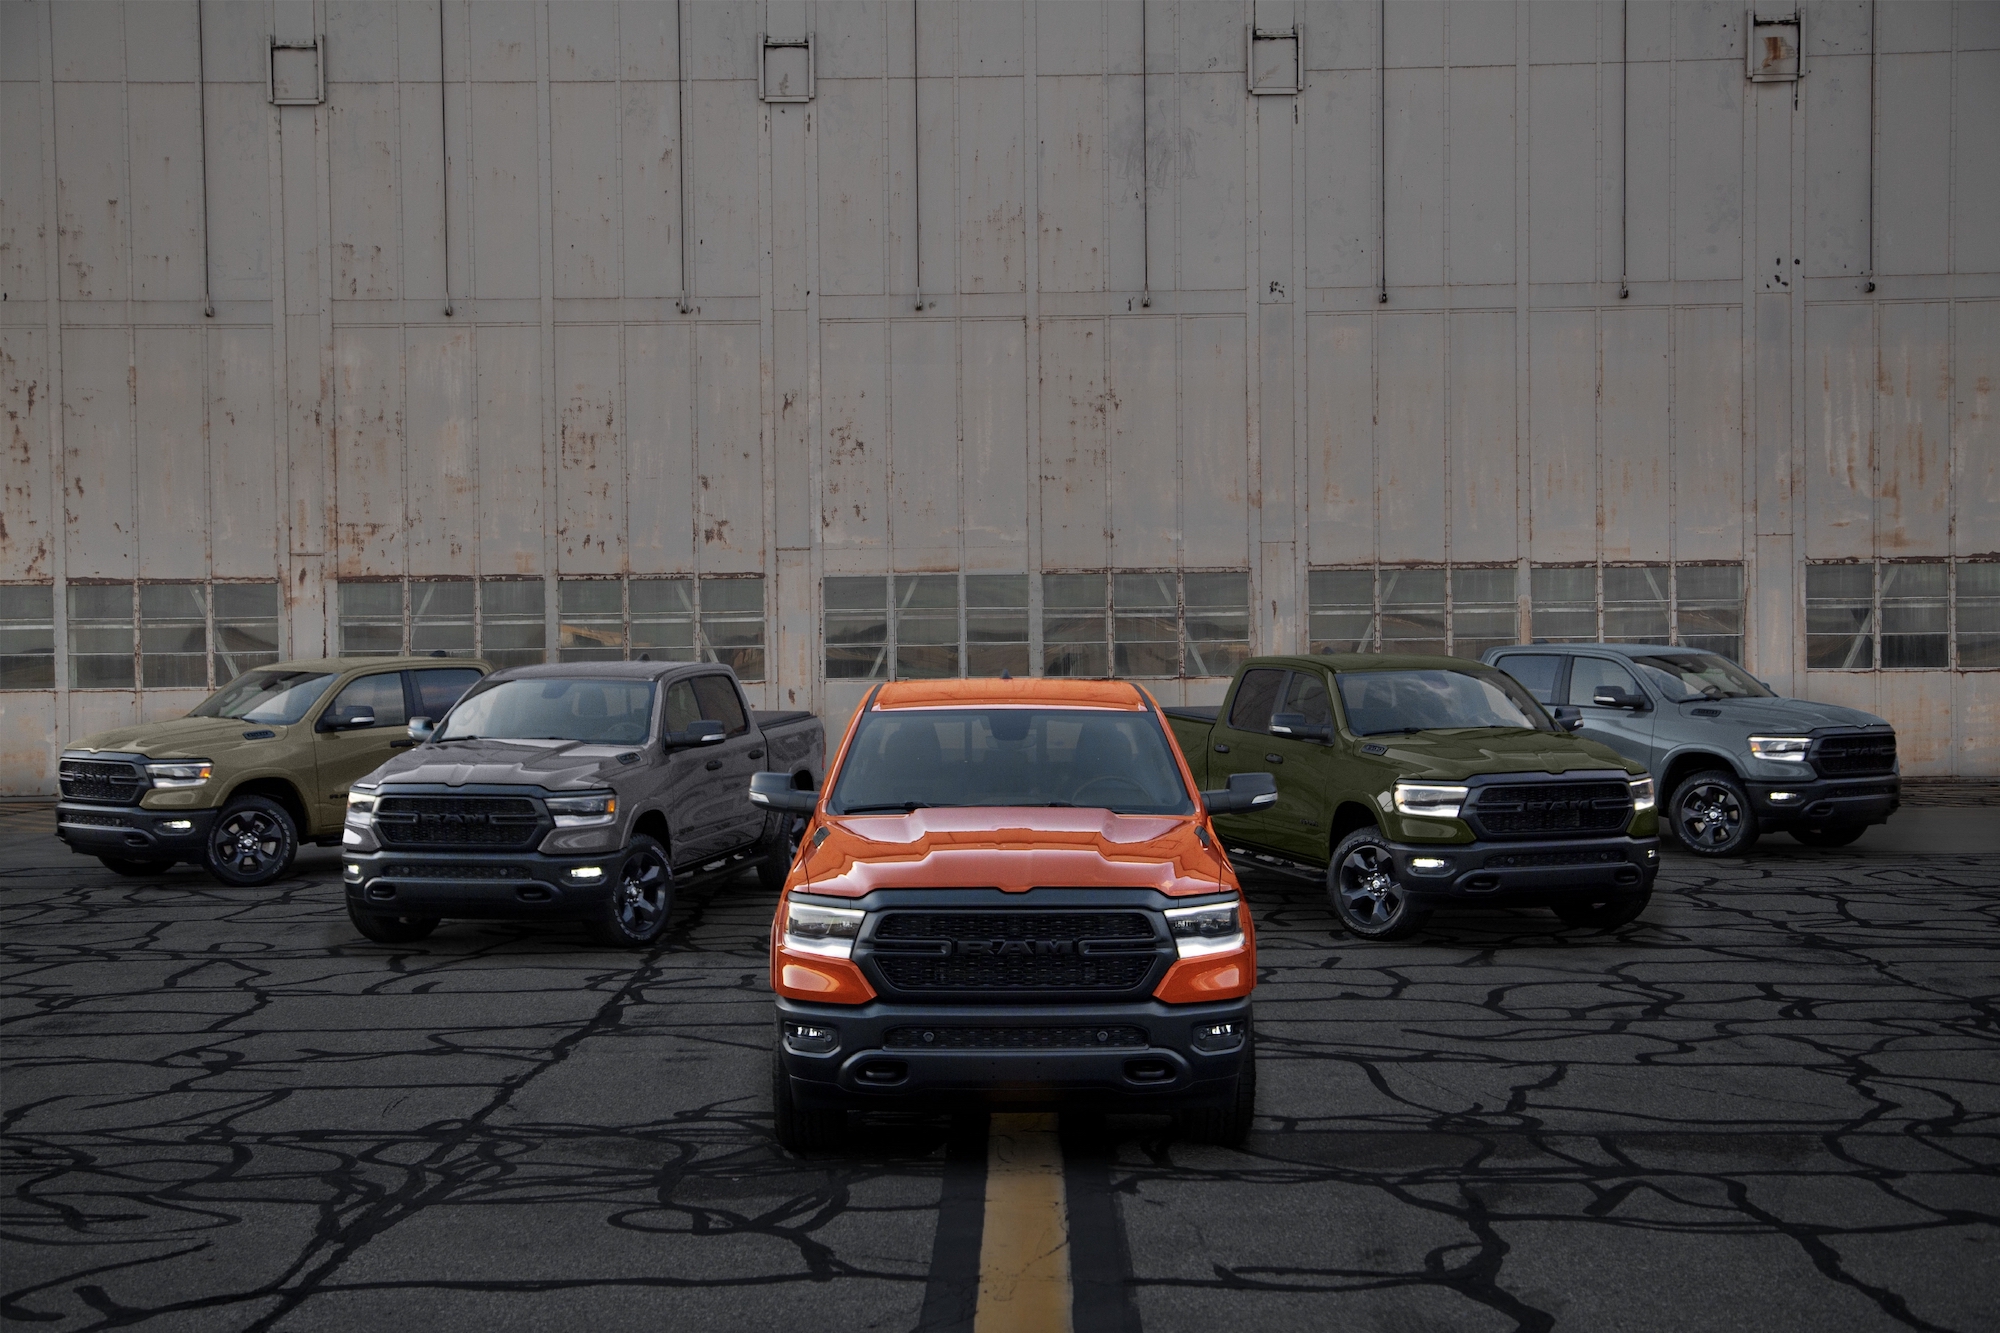 Five 2021 Ram trucks in colors that honor the five branches of the U.S. Military. Ram is one of the most liked car brands.